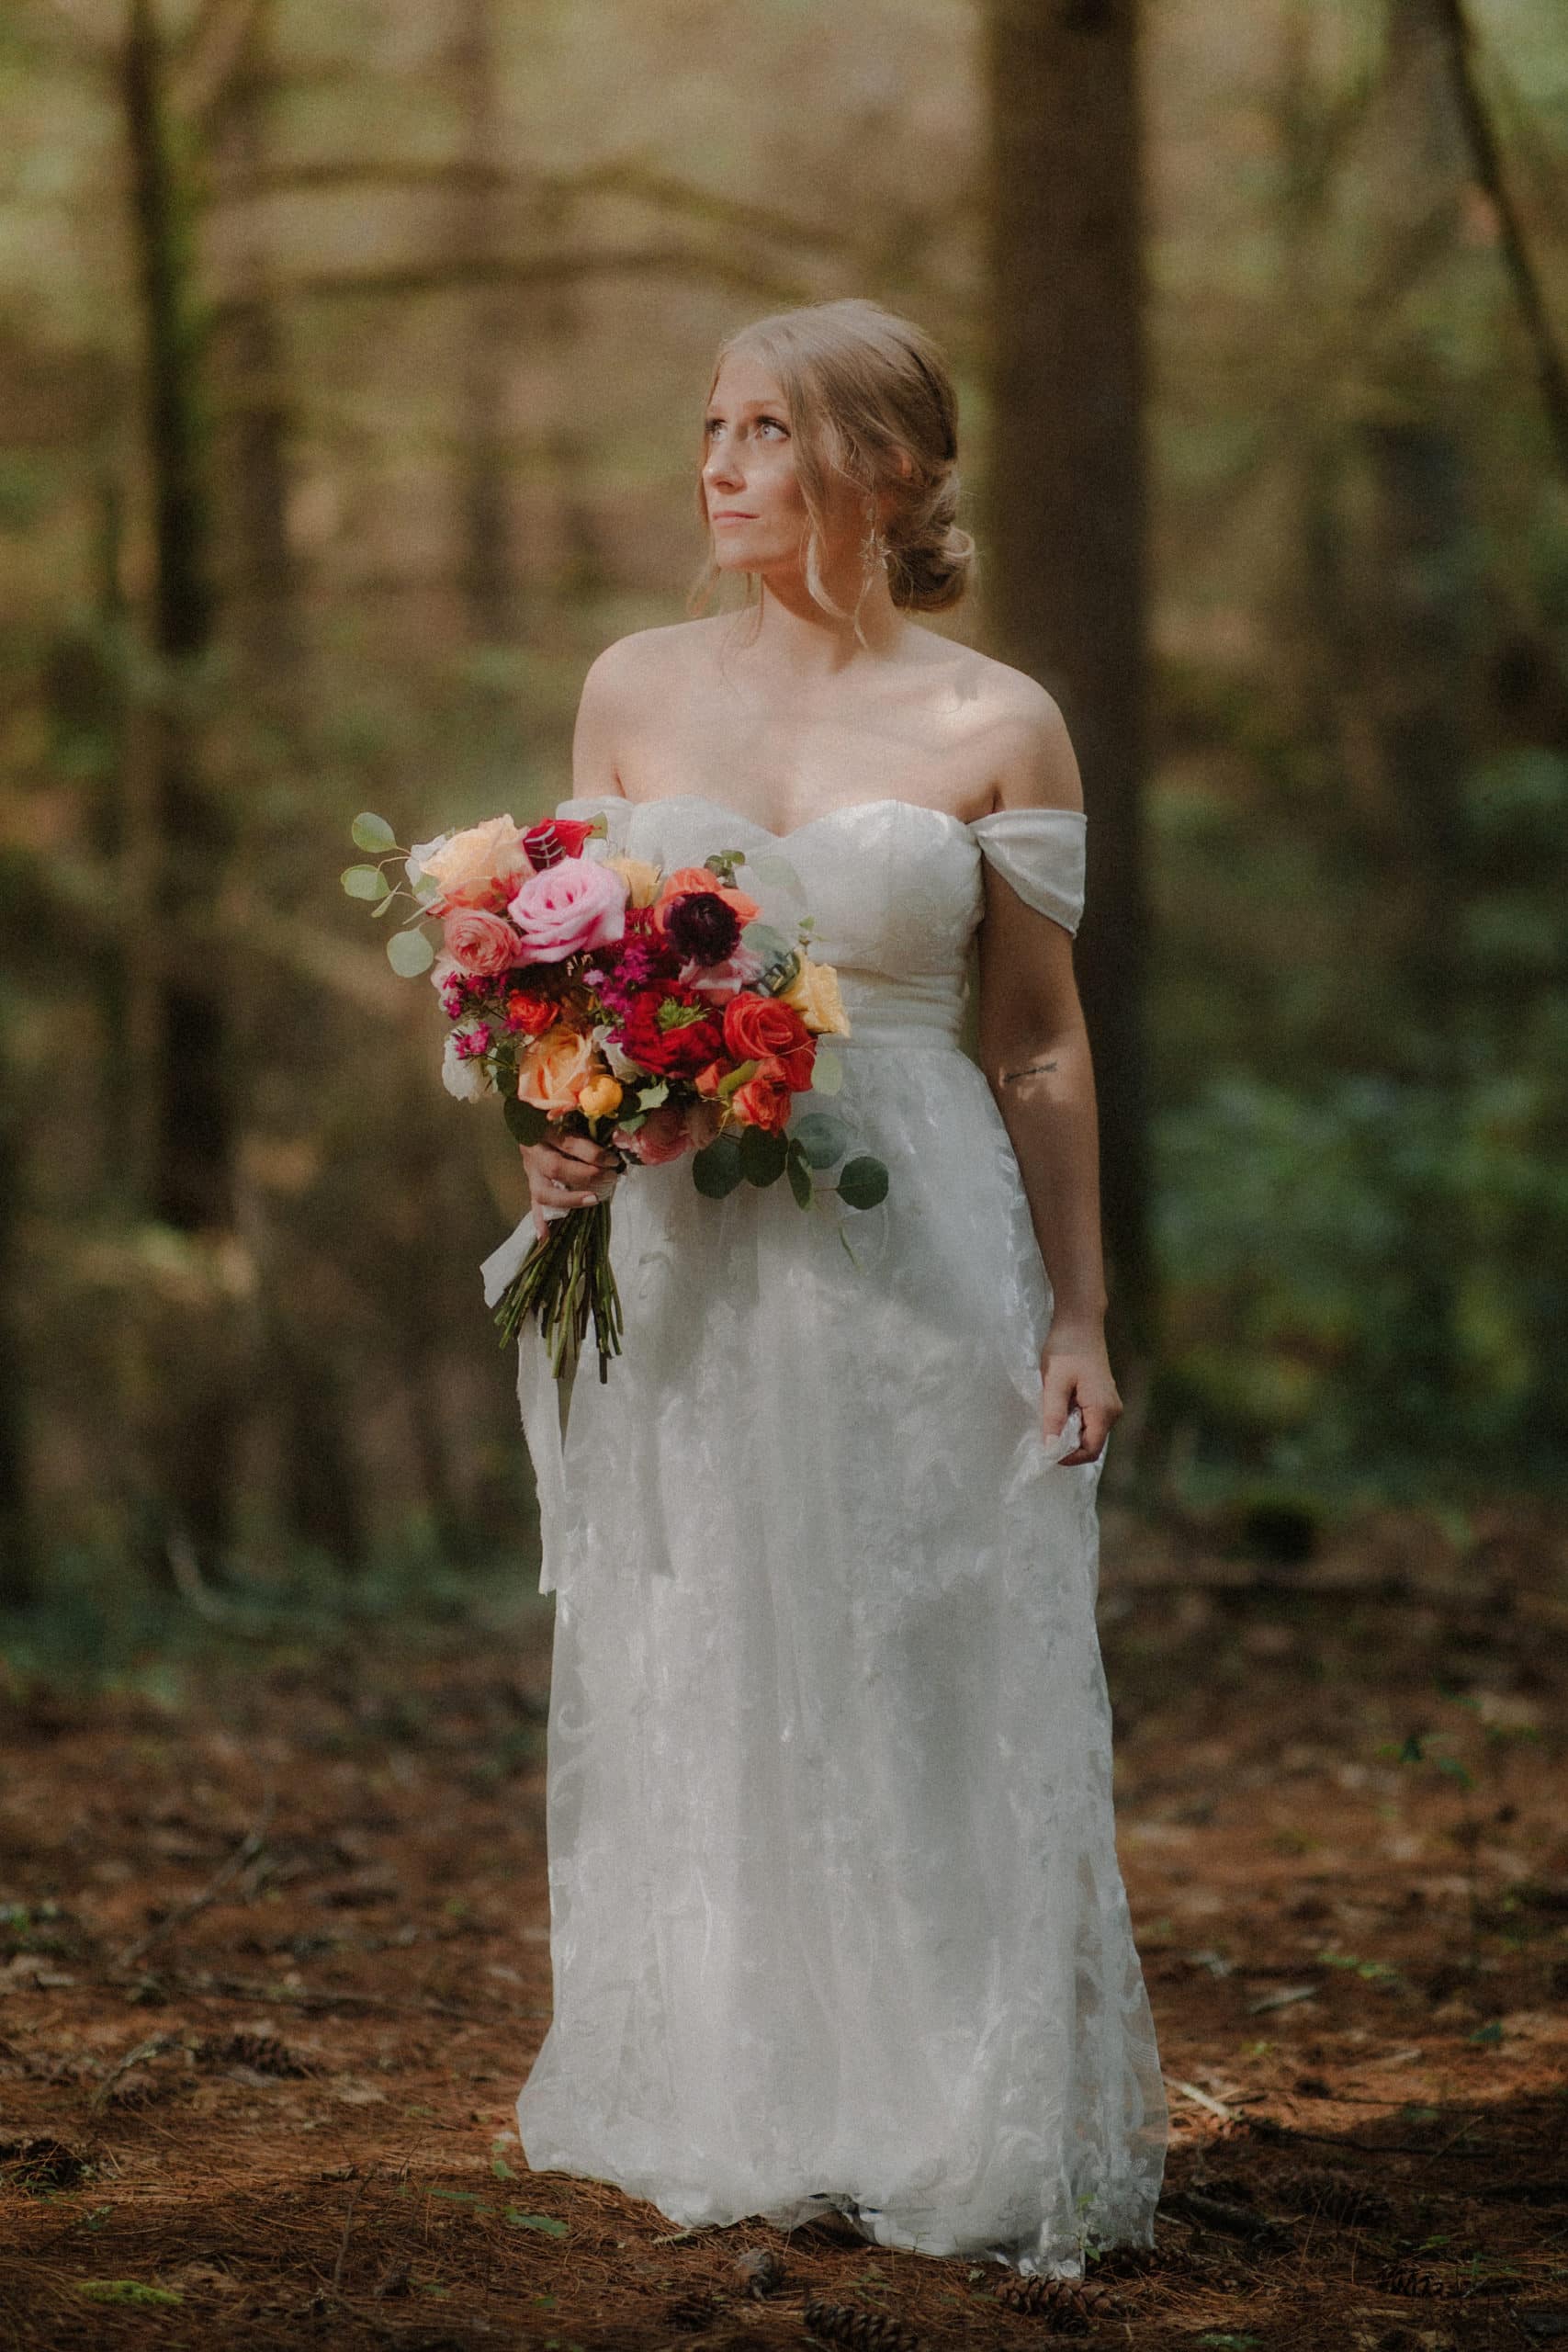 Red River Gorge Elopement